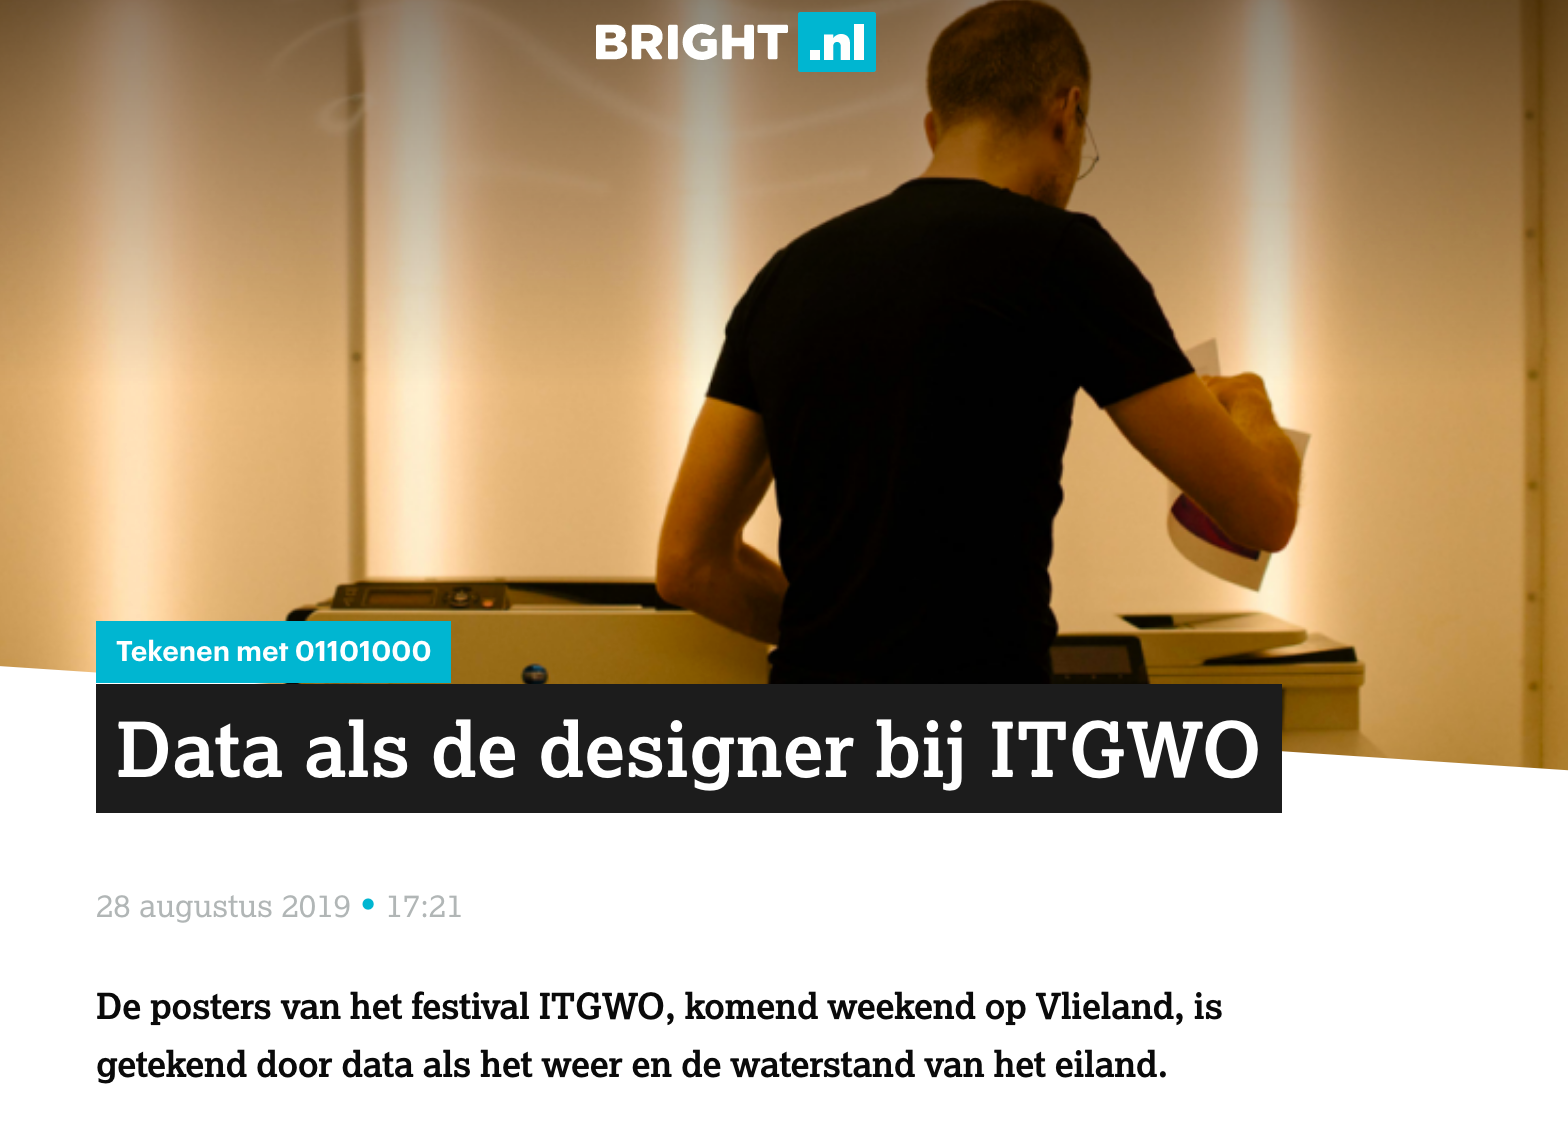 Image for Bright.nl publicity item